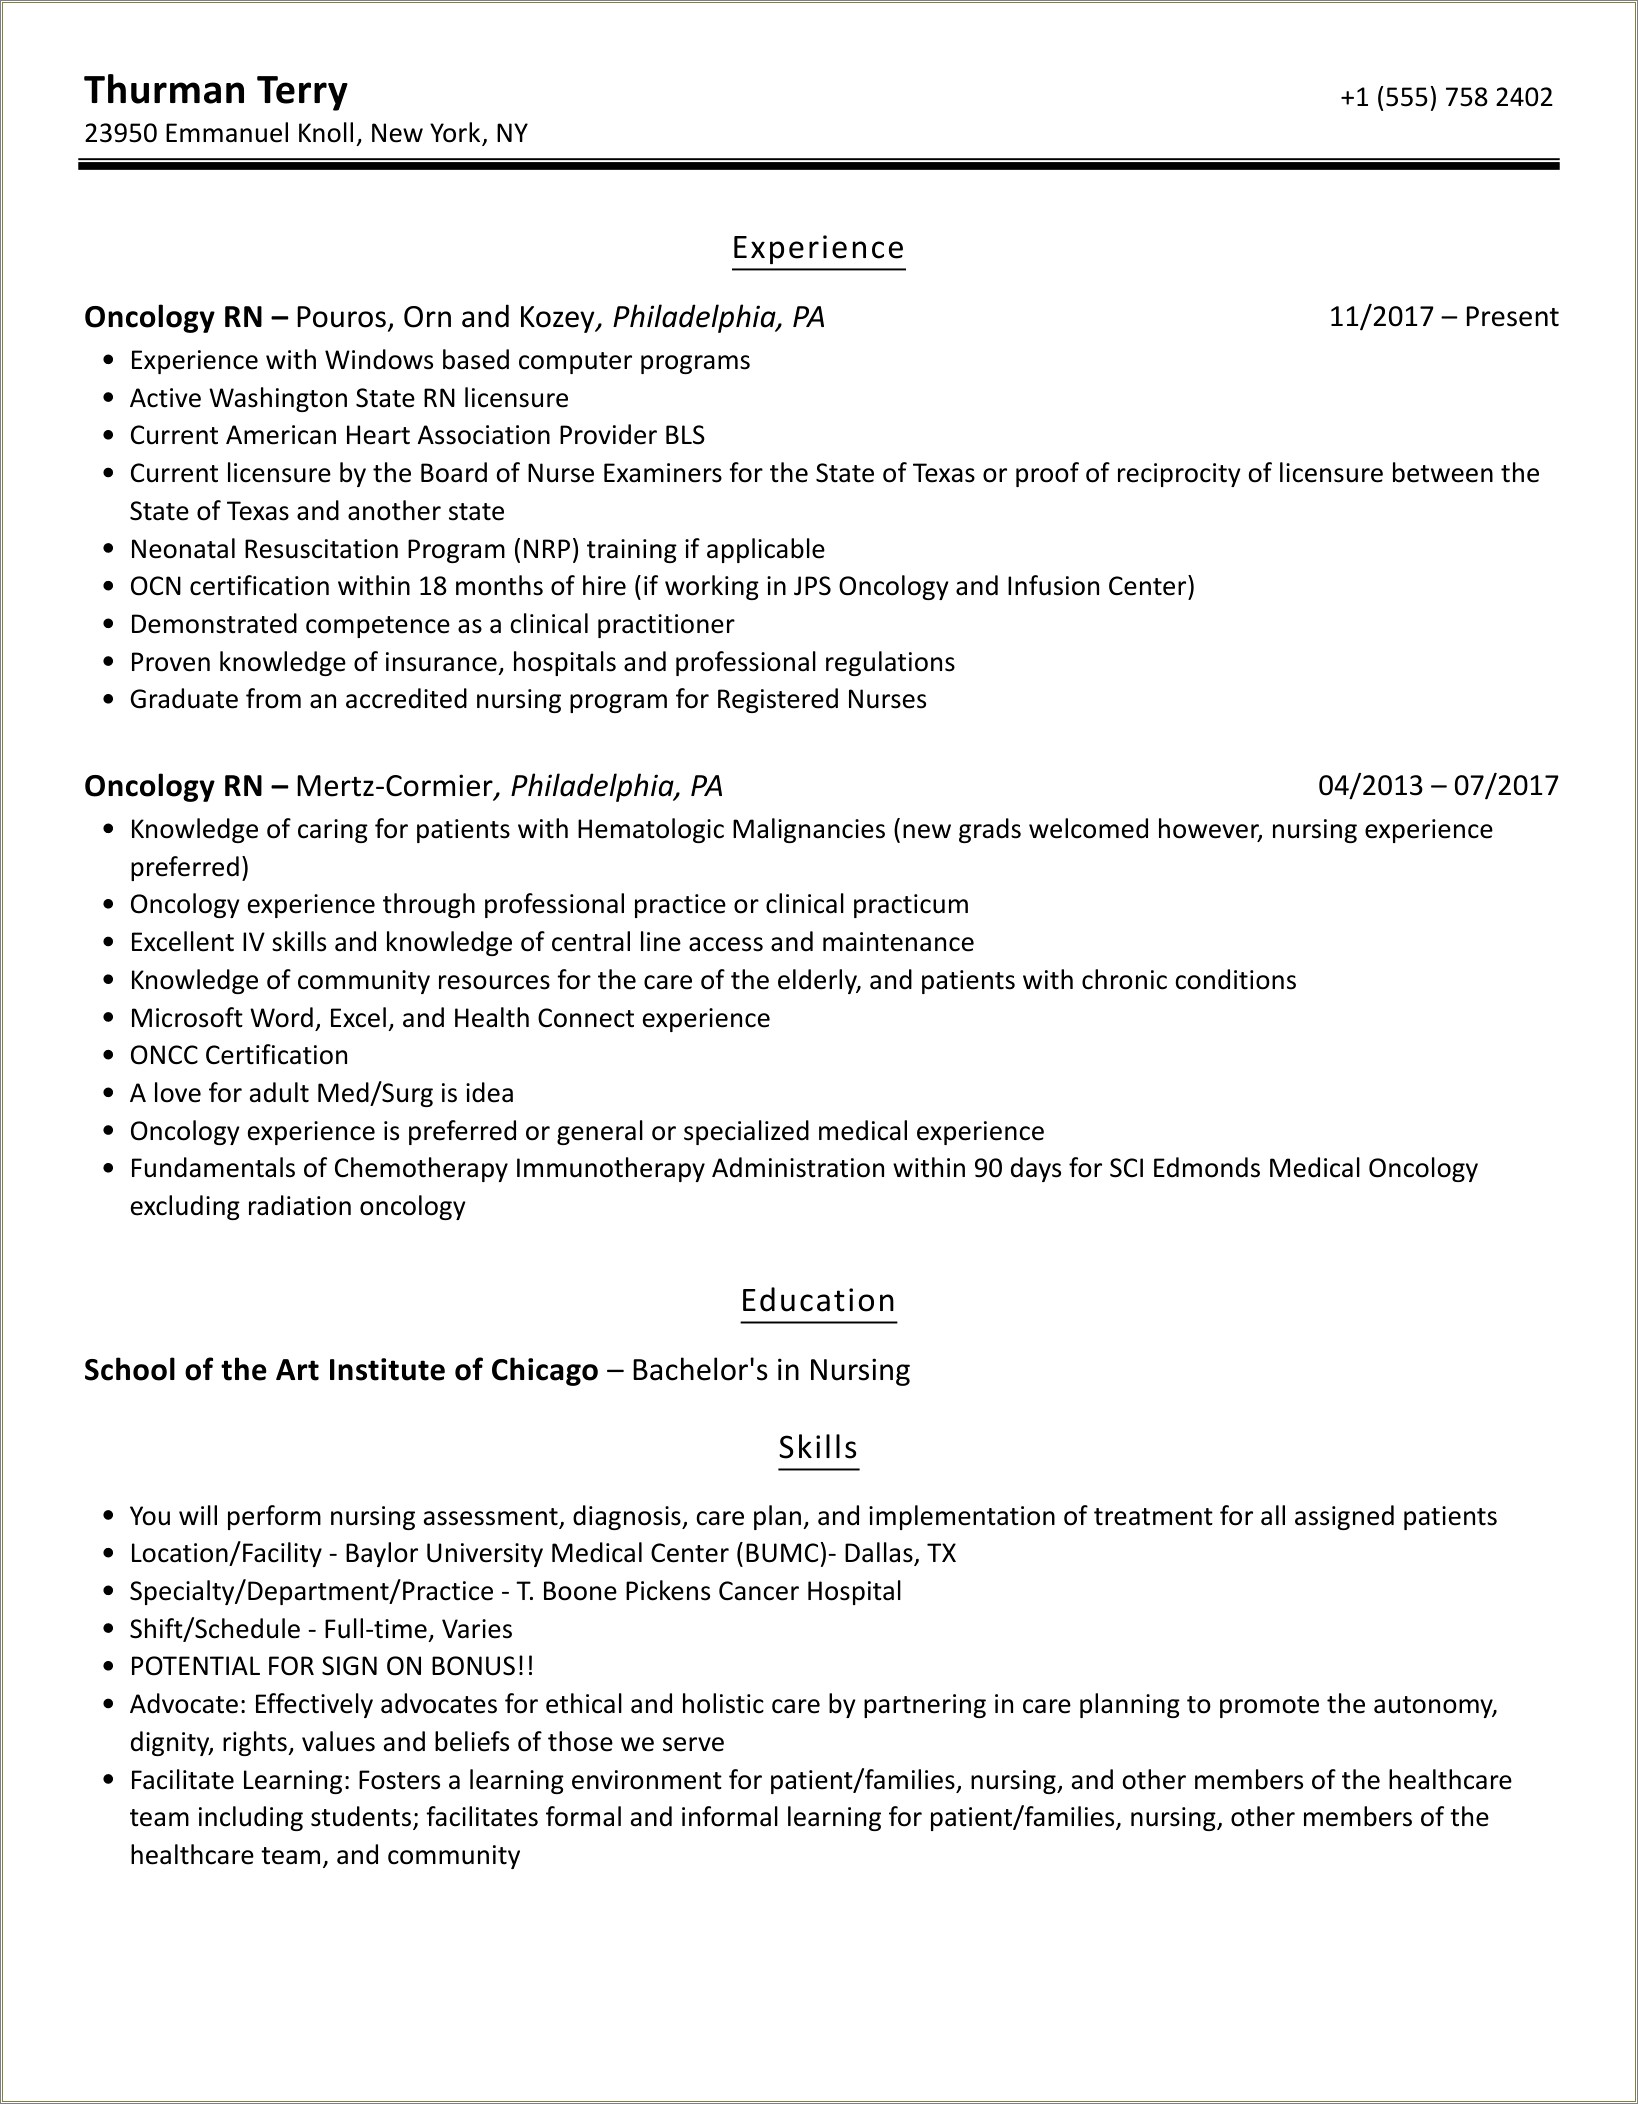 Nursing Resume With One Year Experience In Oncology